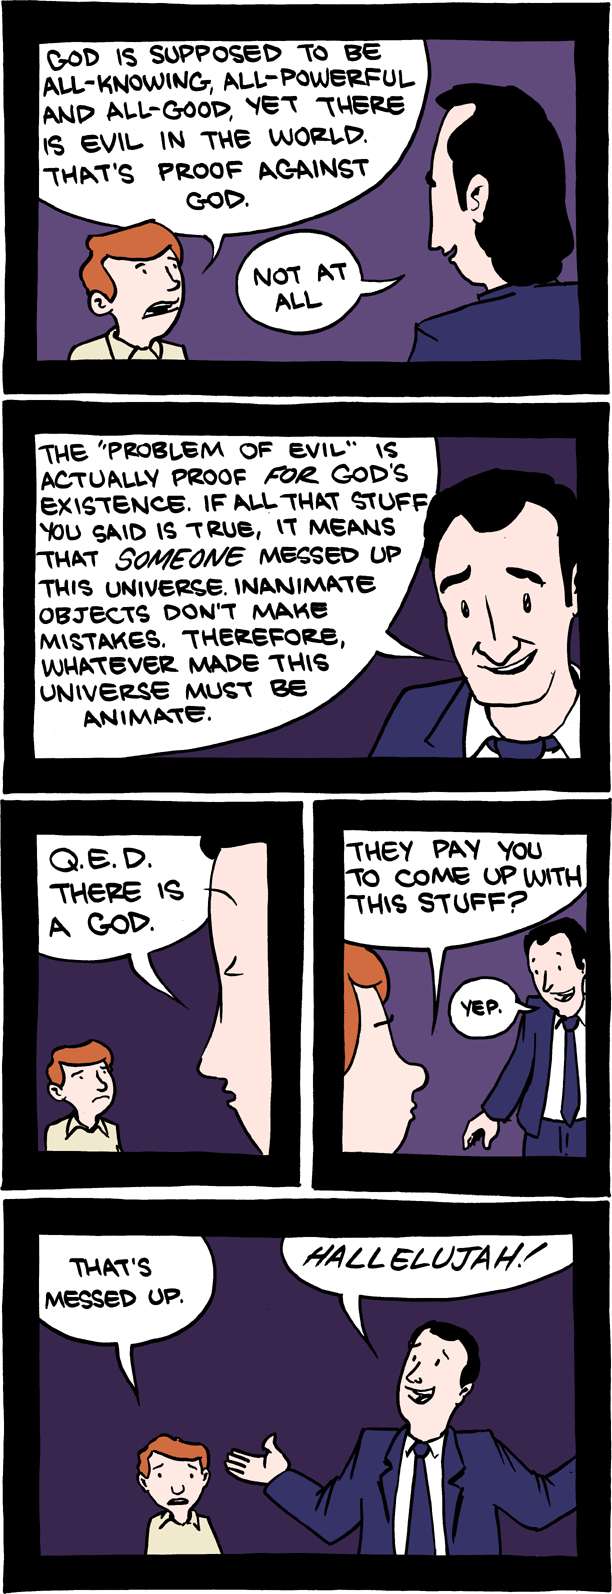 smbc economics - God Is Supposed To Be AllKnowing, AllPowerful And AllGood, Yet There Is Evil In The World That'S Proof Against God. Not At All The "Problem Of Evil" Is Actually Proof For God'S Existence. If All That Stuff You Said Is True, It Means That 